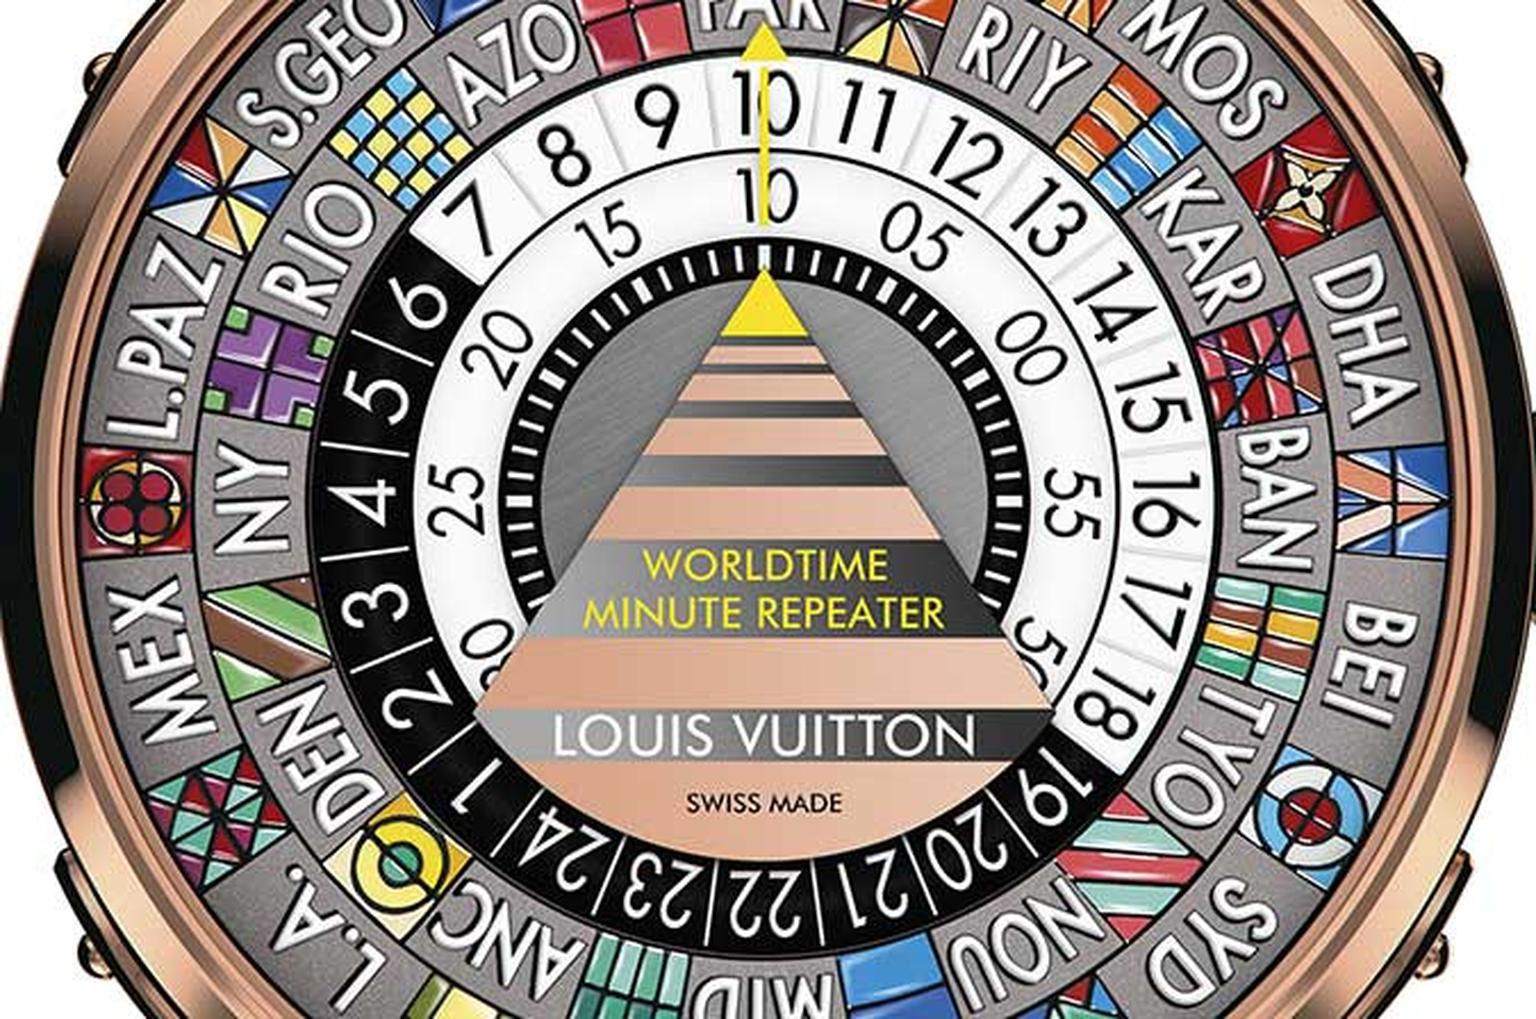 Louis -Vuitton -Escale -Minute -Repeater -Worldtime -watch